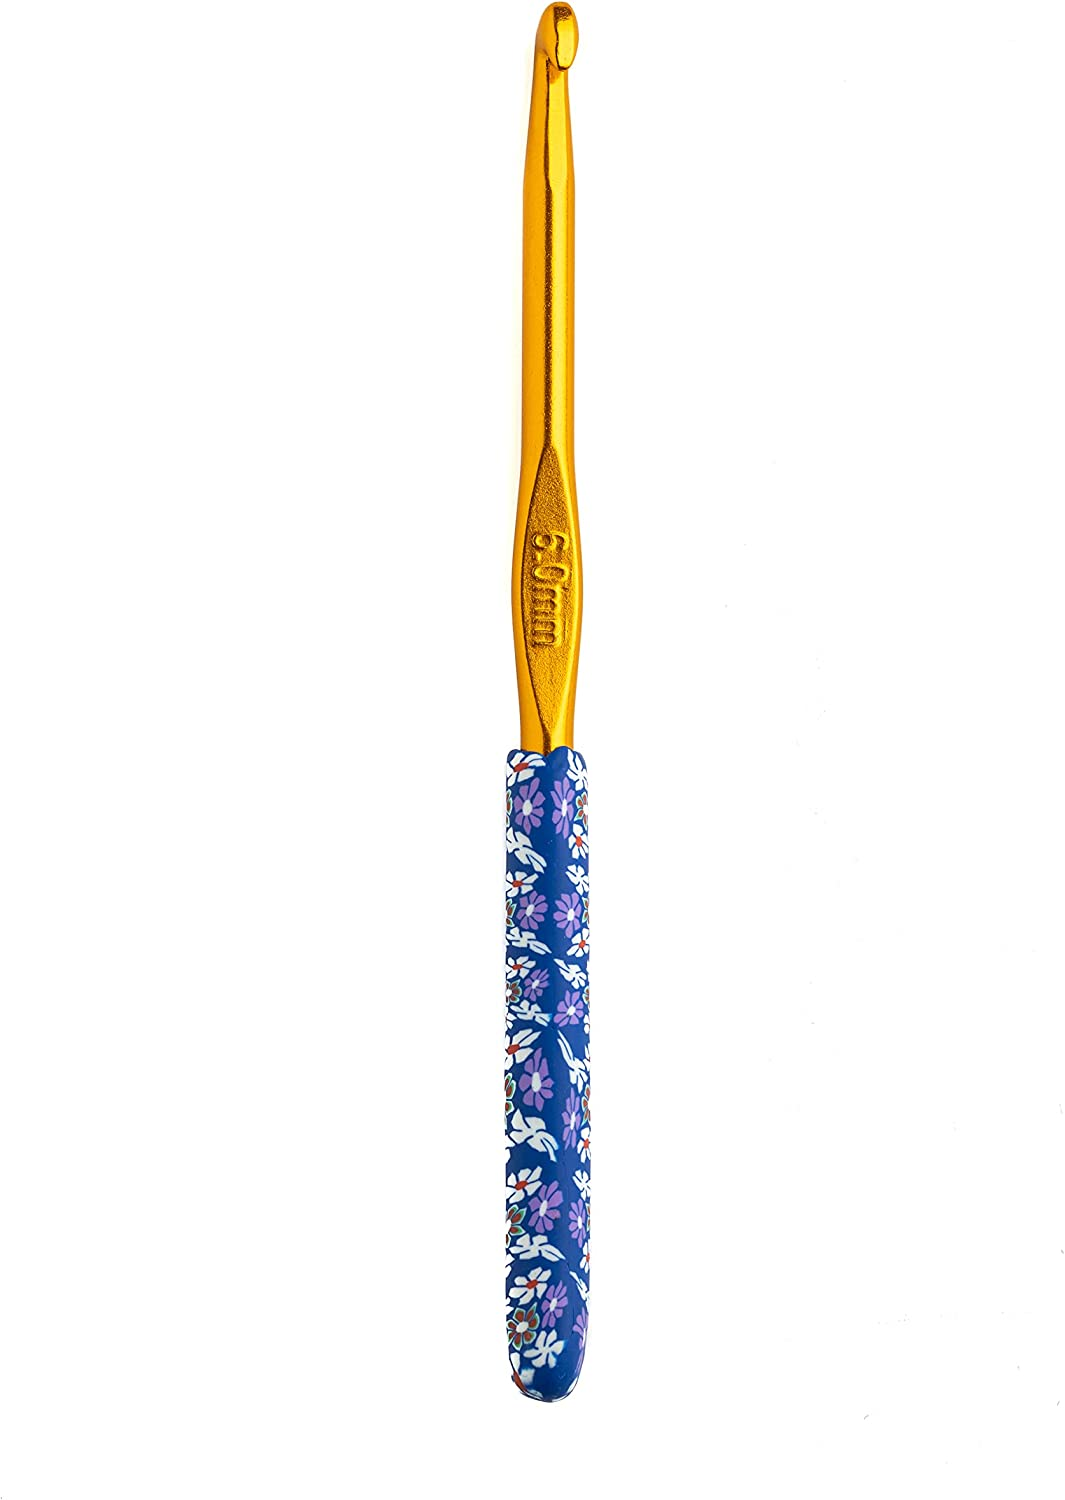 The Quilted Bear Crochet Hook Set - Premium Soft Grip Floral Crochet Hooks  with Ergonomic Polymer Clay